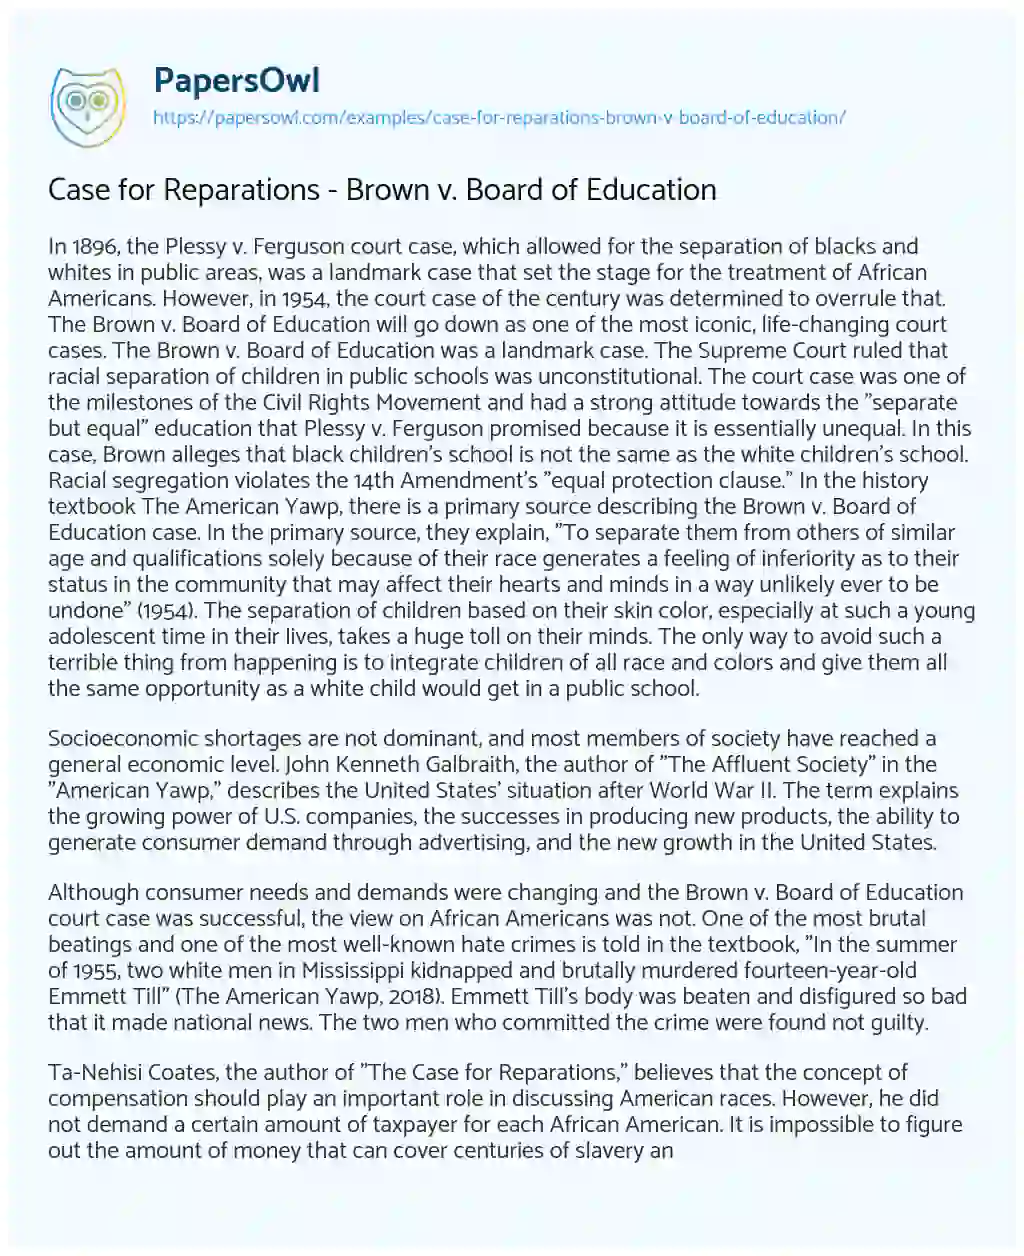 Essay on Case for Reparations – Brown V. Board of Education